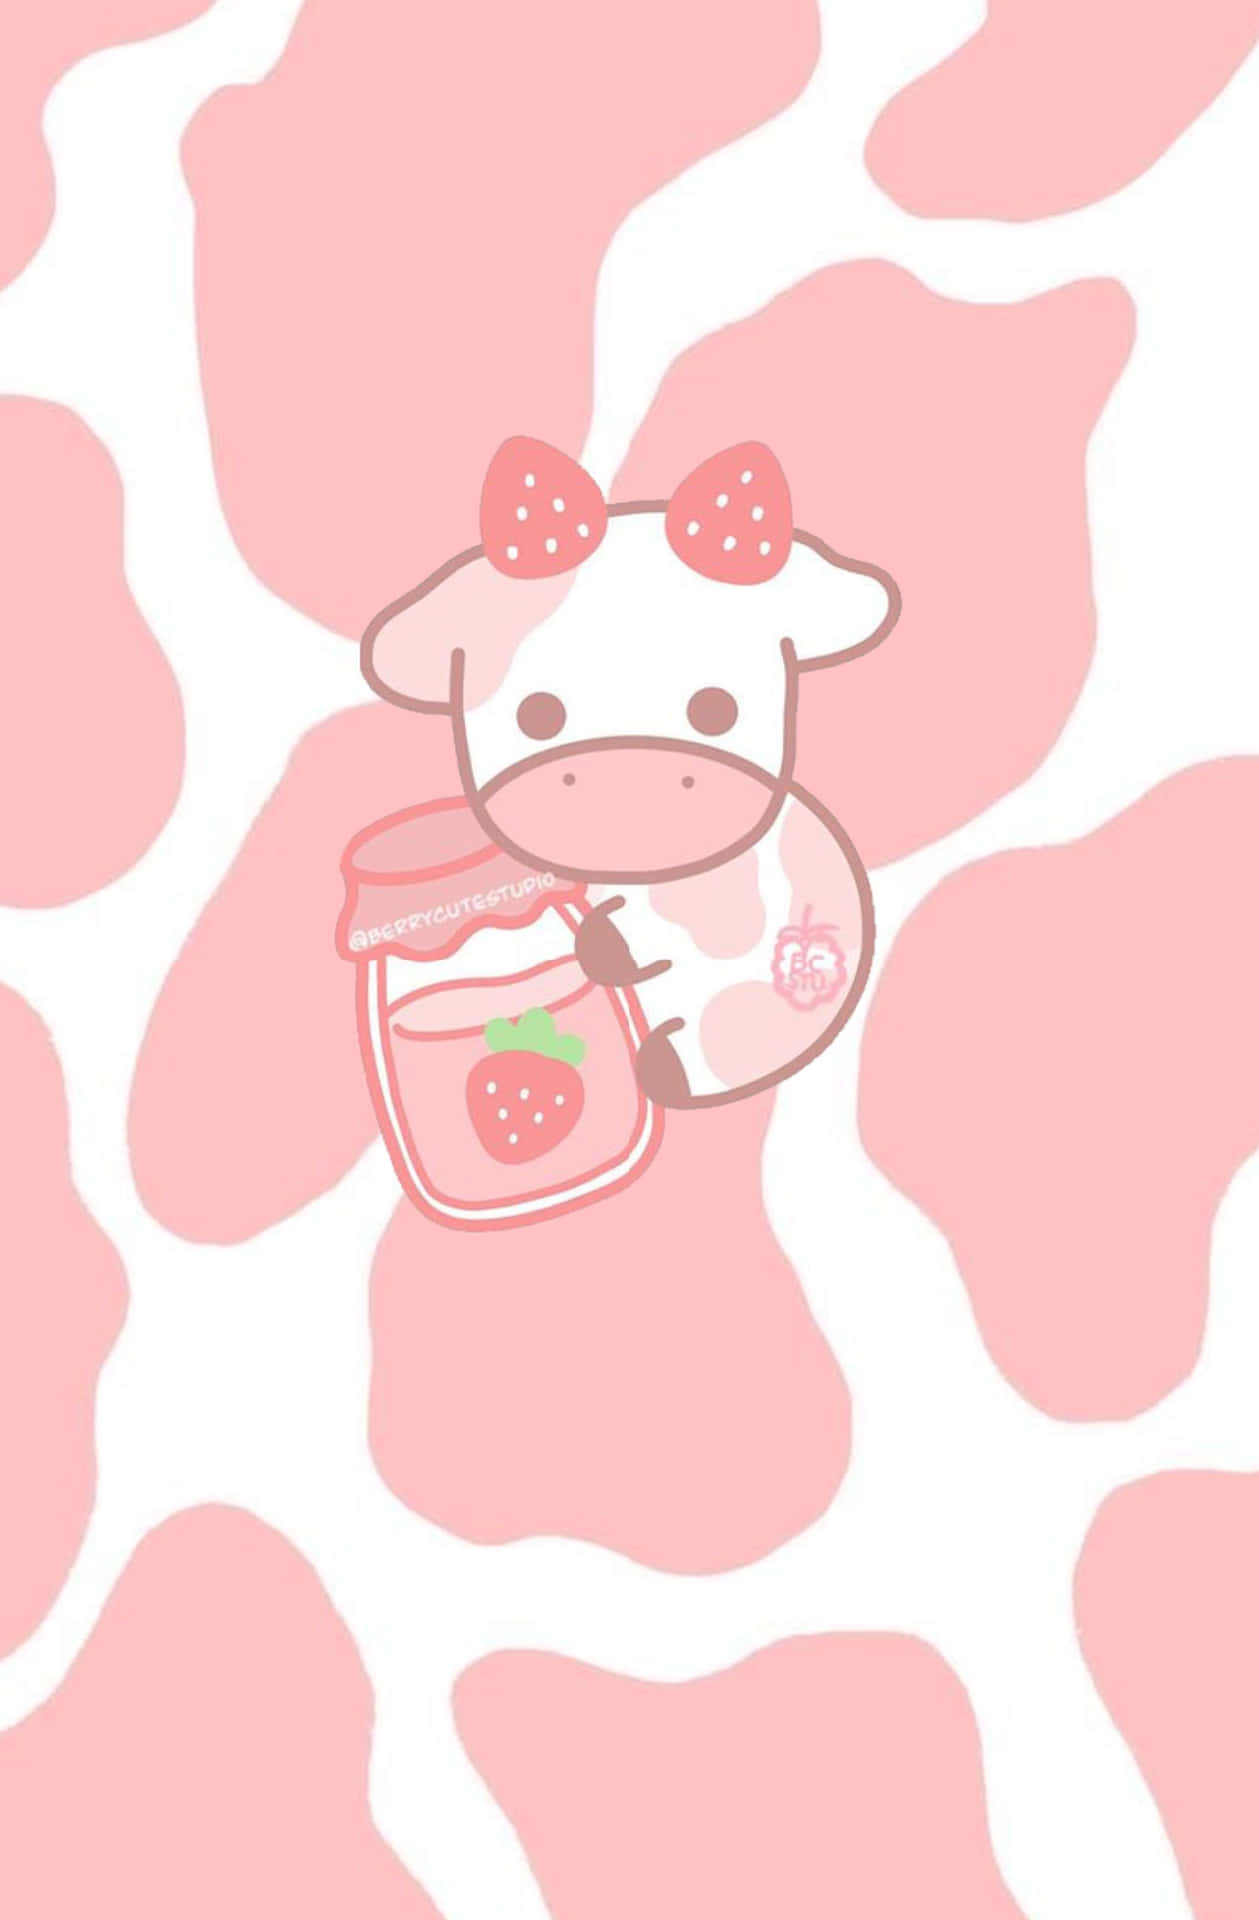 “Freshen up your day with a smile from Kawaii Cow!” Wallpaper